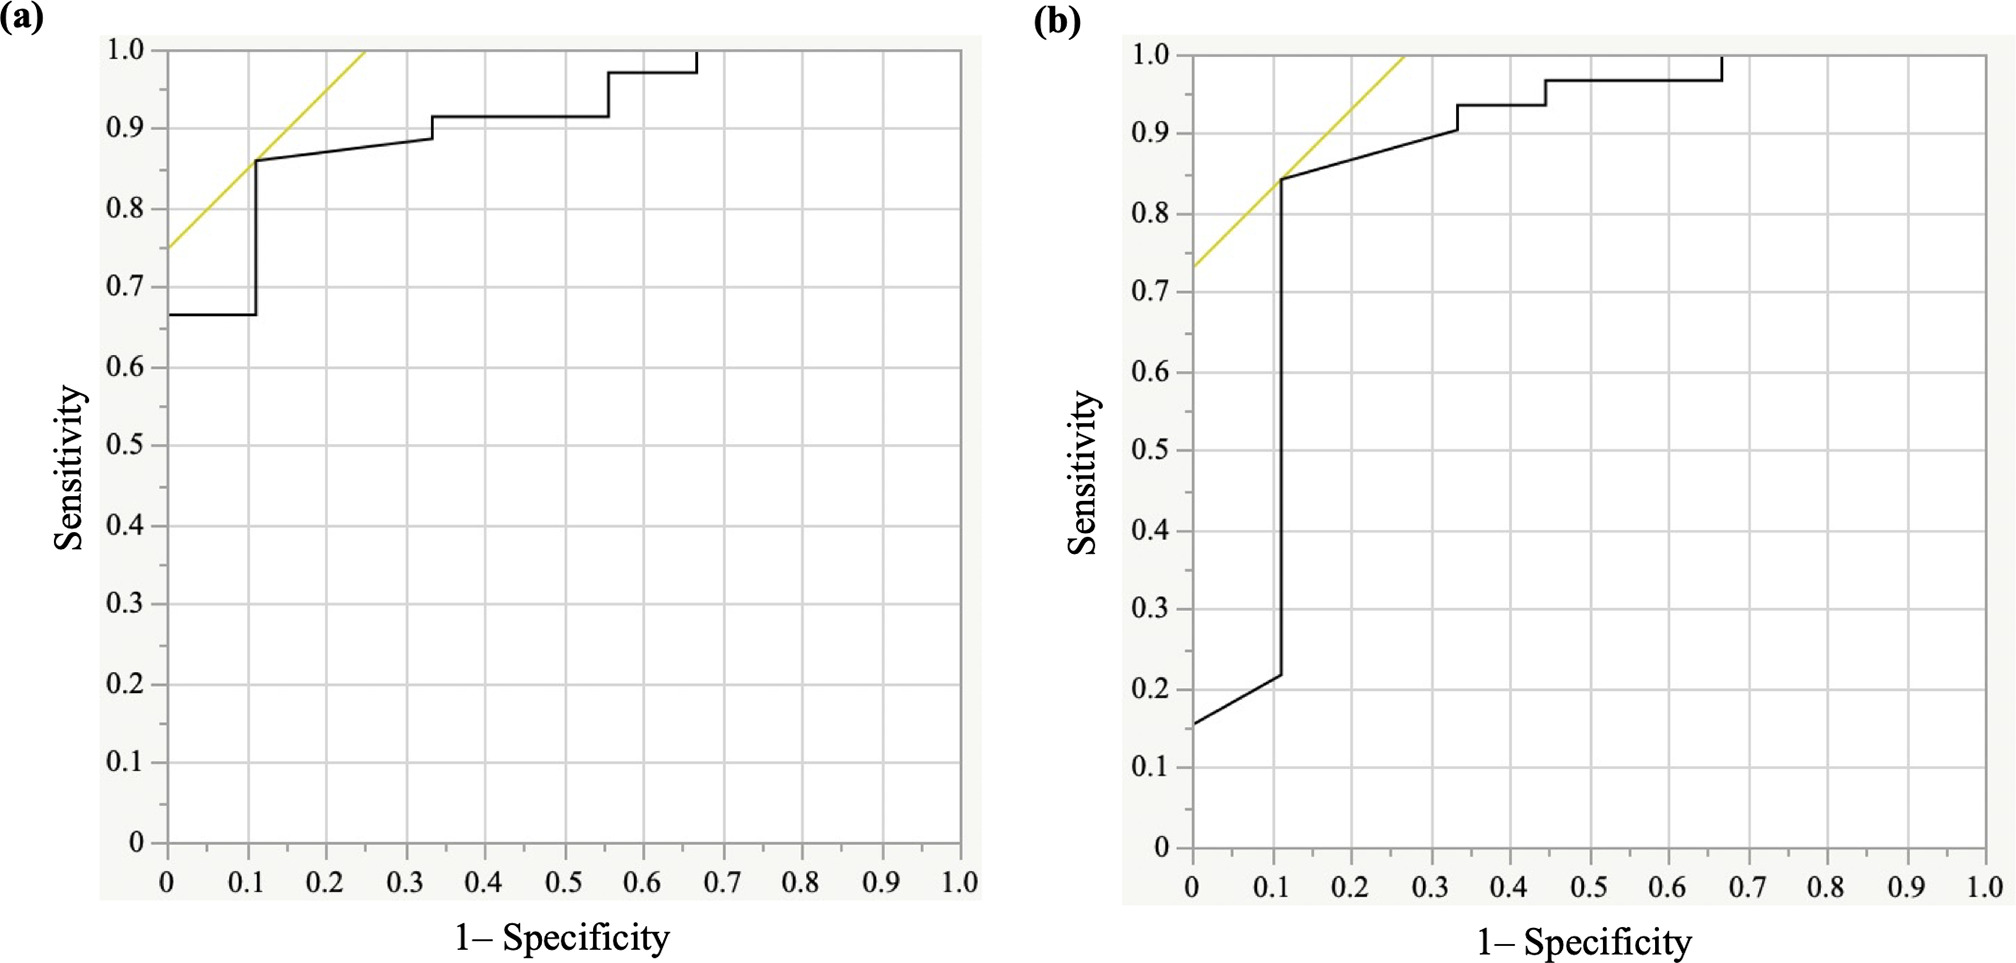 Fig. 3 
          Receiver operating characteristic curve for favourable Toronto Extremity Salvage Score (TESS) and Comprehensive Outcome Measure for Musculoskeletal Oncology: Lower Extremity (COMMON-LE). a) The threshold for TESS was 64.8 (sensitivity 86%, specificity 89%, area under the curve 0.91). b) The threshold for COMMON-LE was 70.4 (sensitivity 84%, specificity 89%, area under the curve 0.87).
        